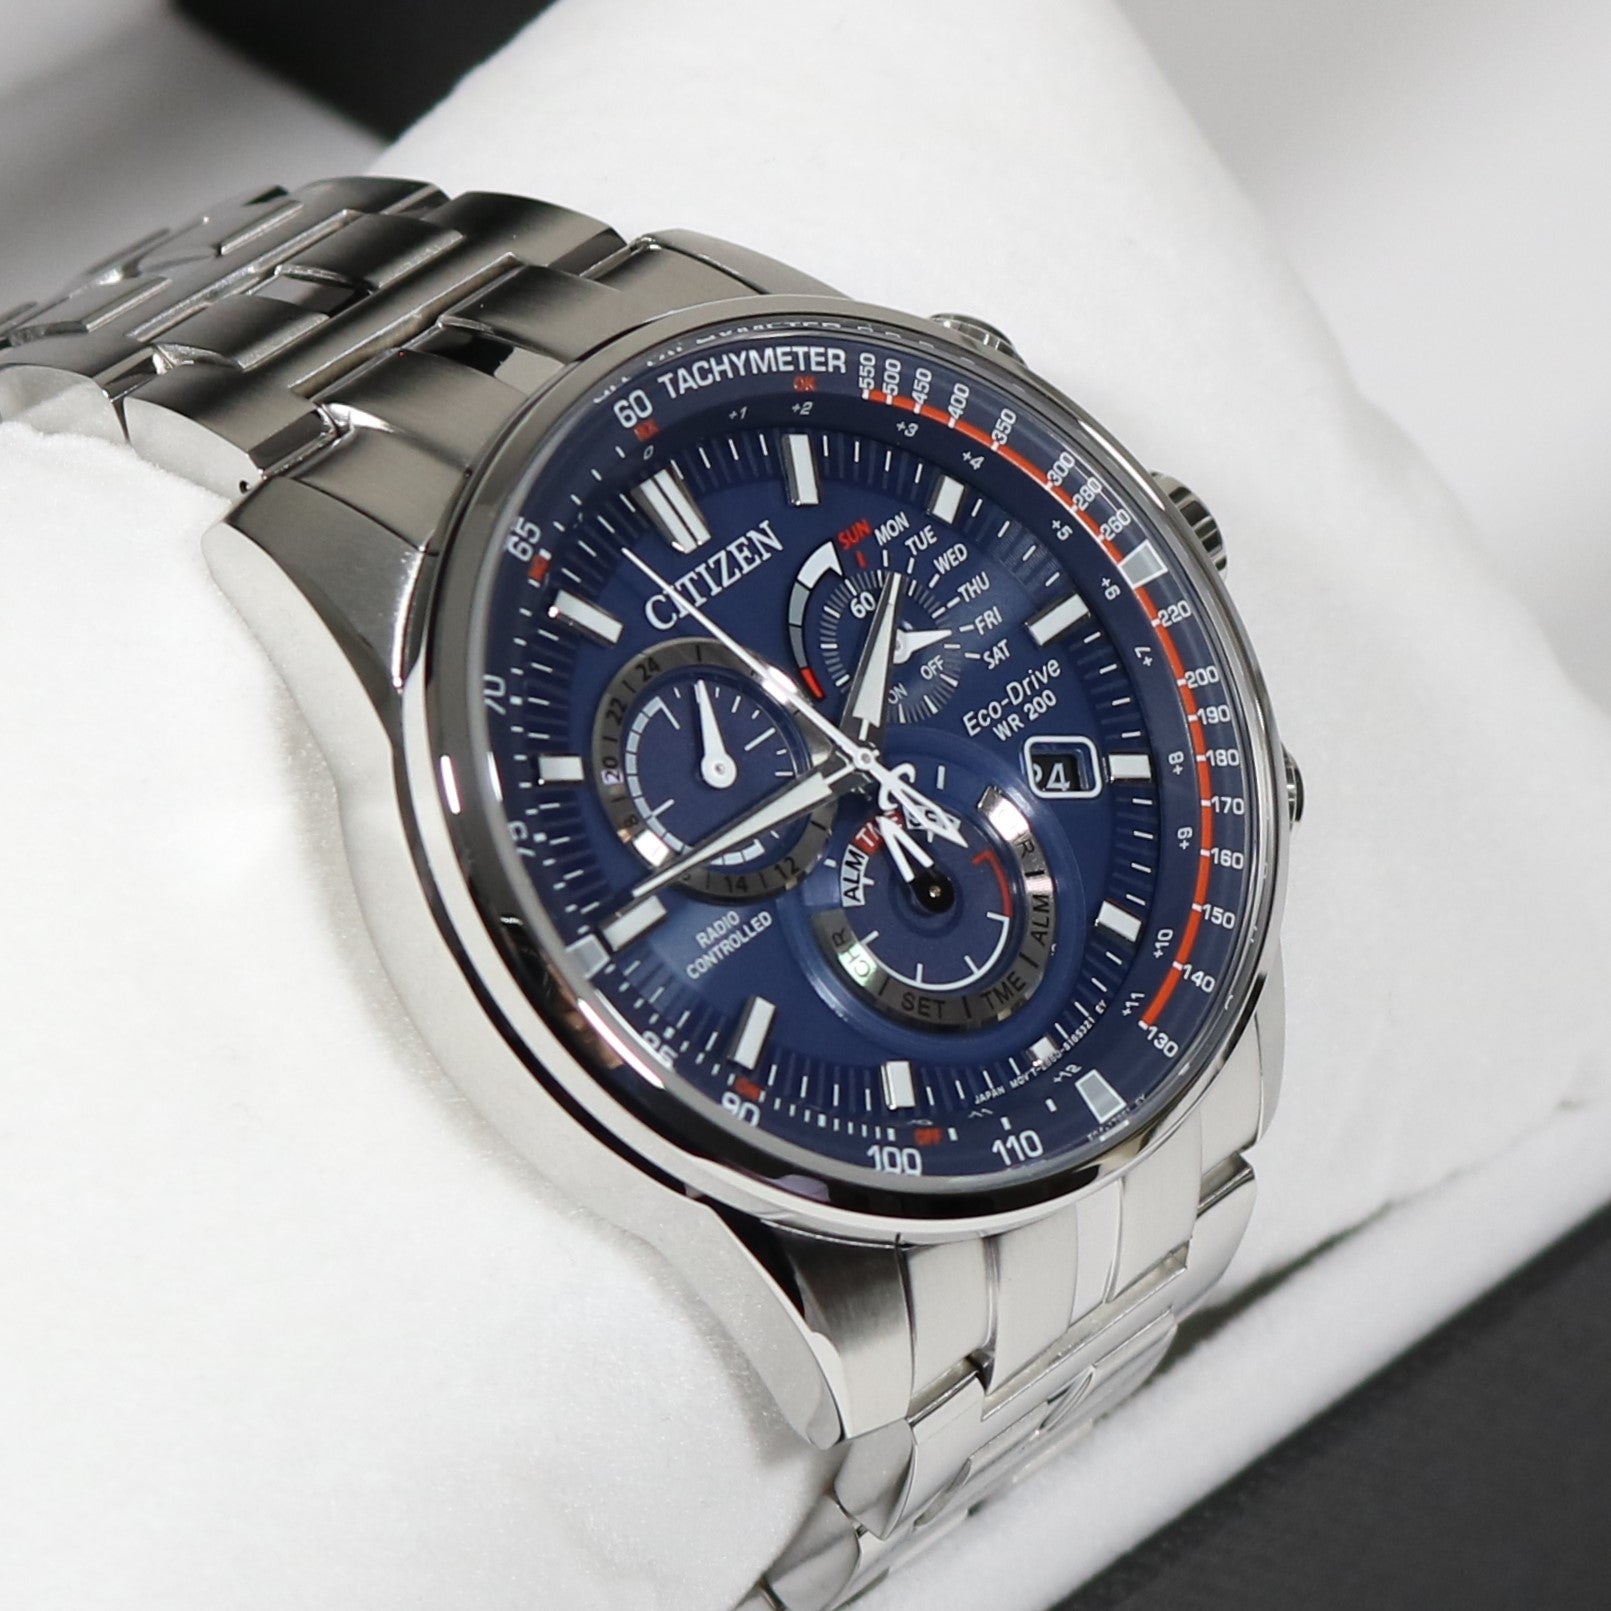 Citizen Eco-Drive Controlled Chronobuy PCAT Dial Chronograph Blue CB5880-5 – Watch